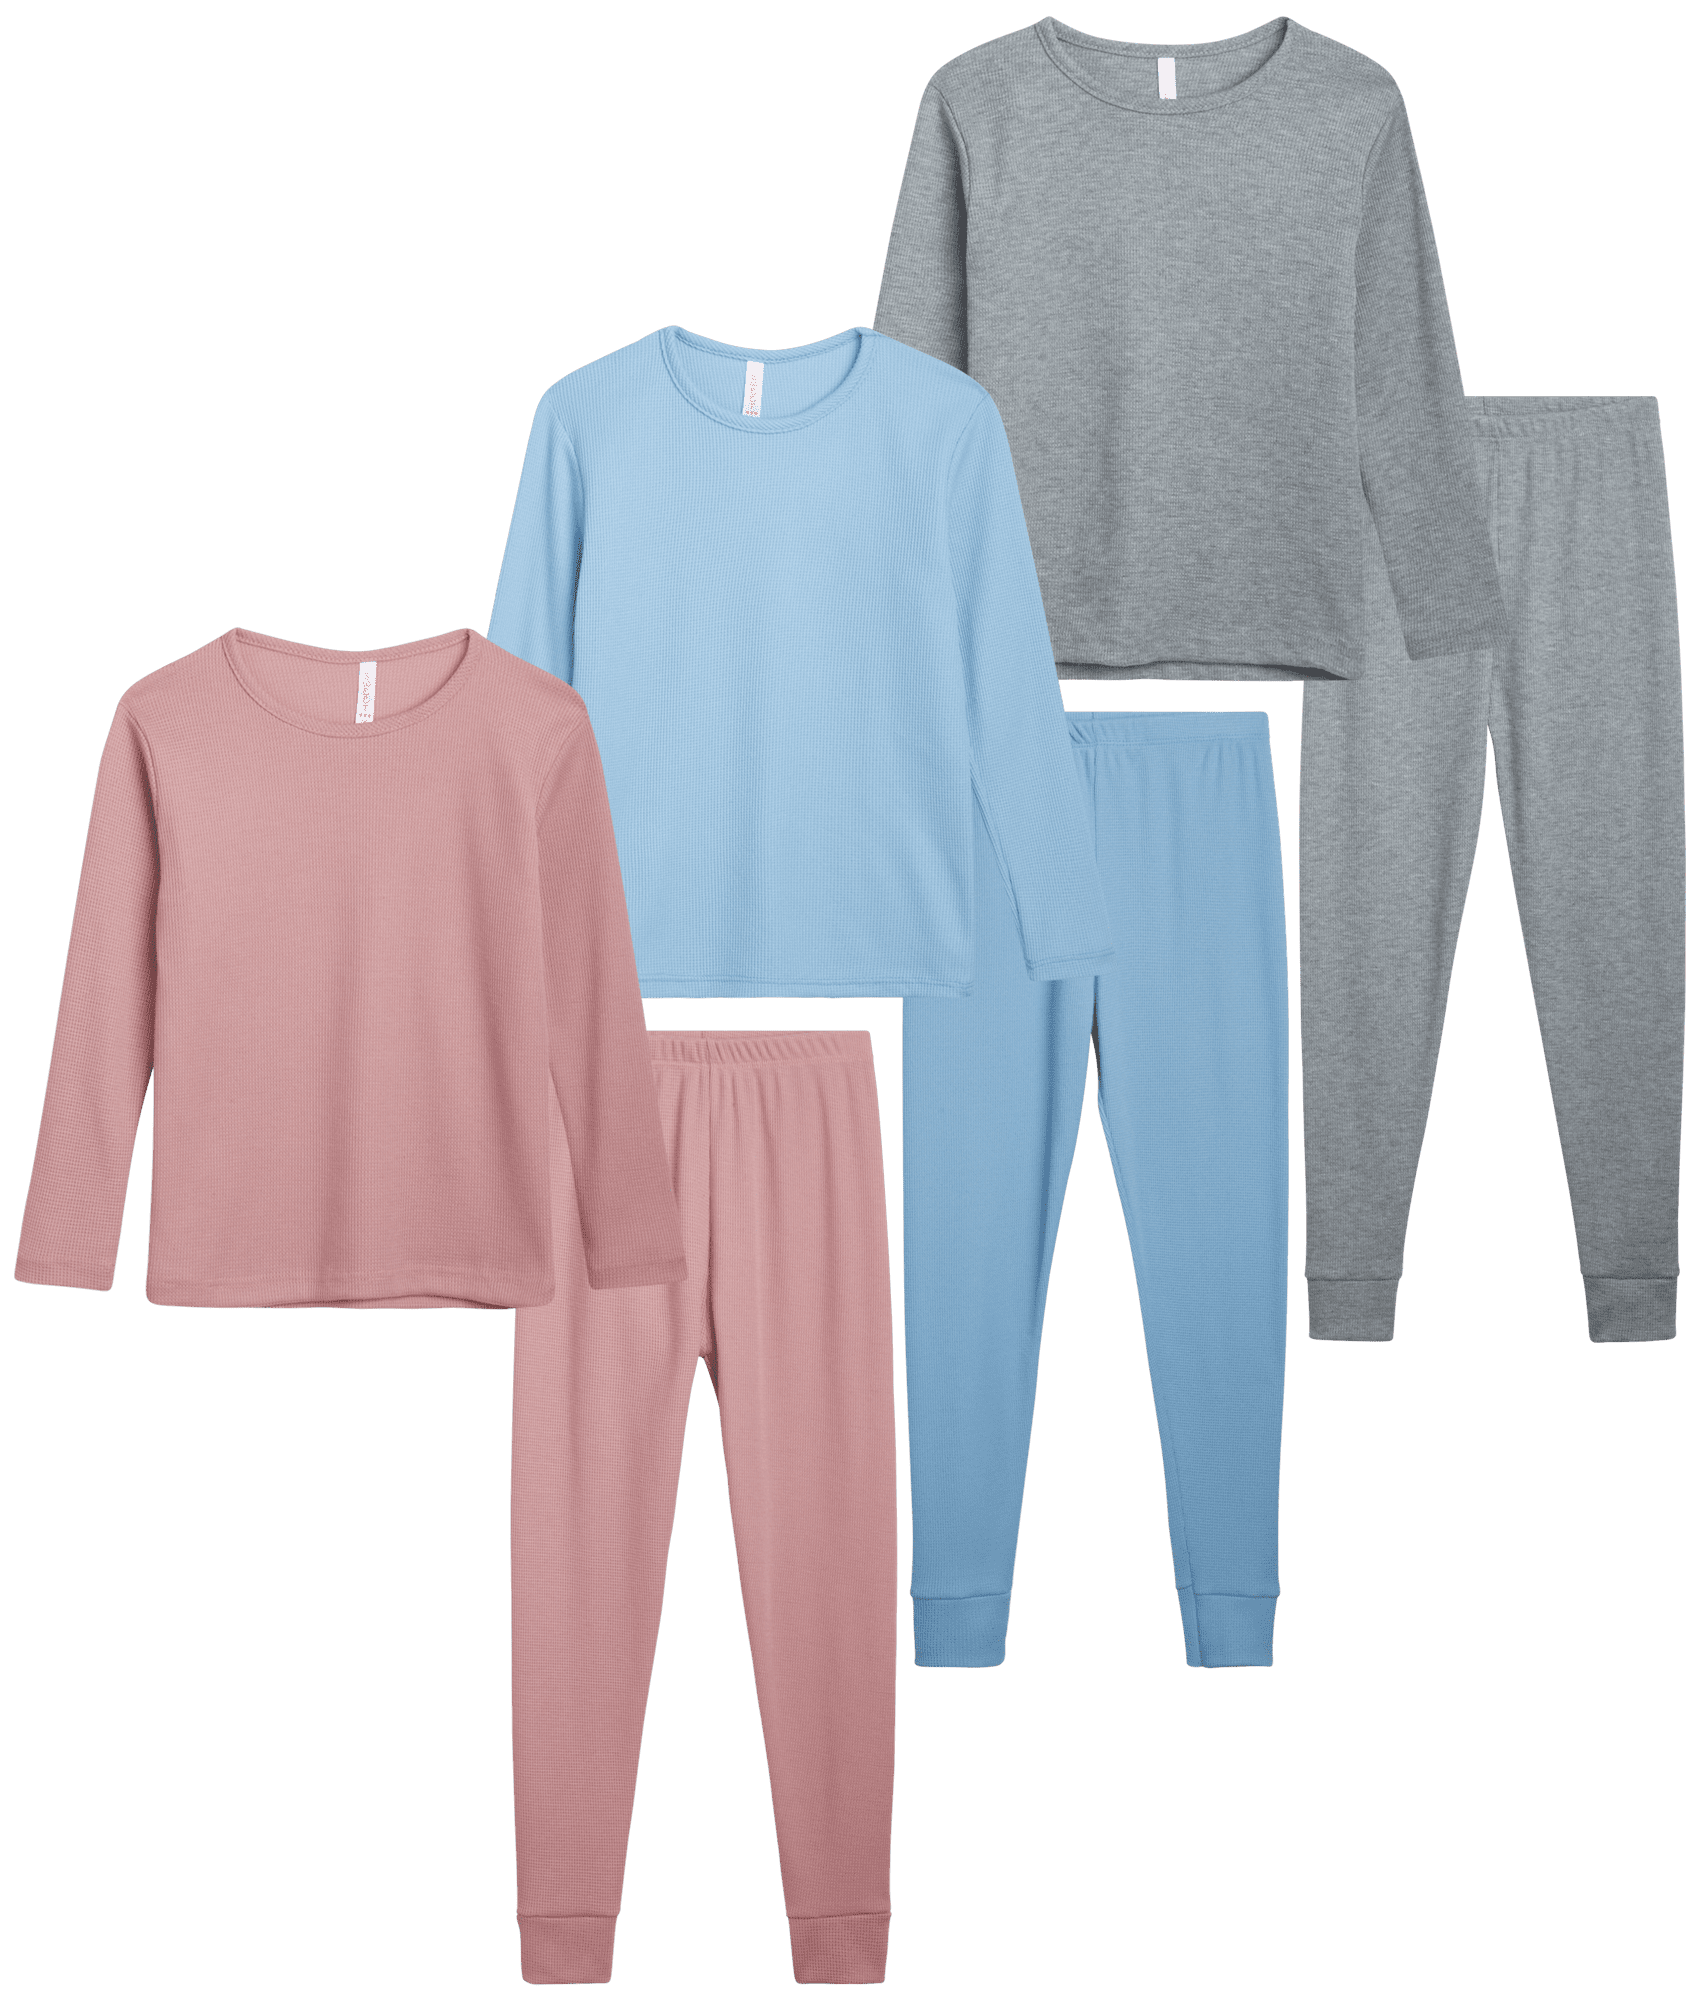 sweet-hearts-girls-thermal-underwear-set-6-piece-waffle-knit-top-long-johns-base-layer-2t